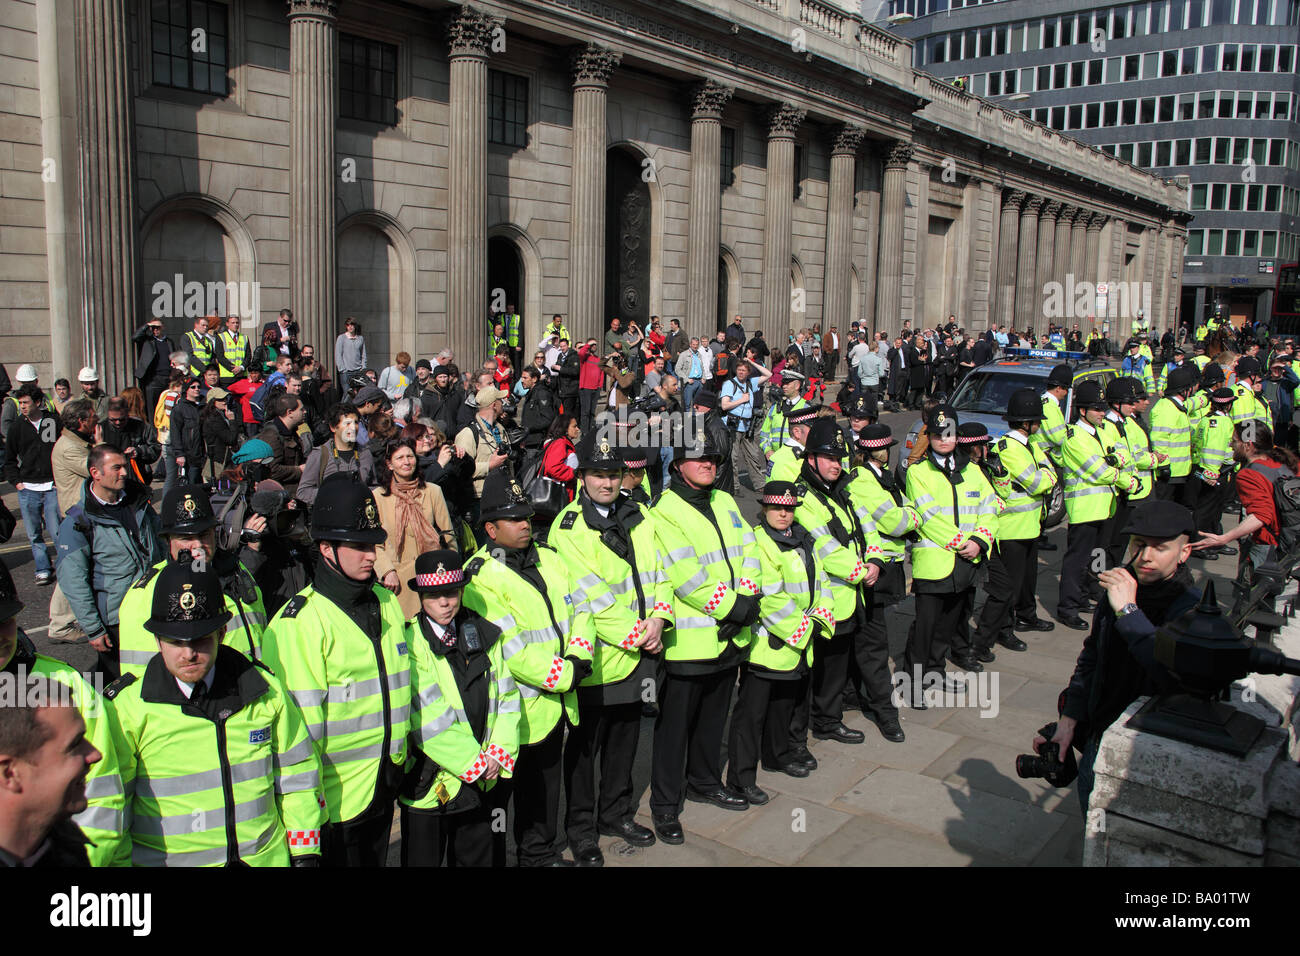 Protesters face police cordon outside the Bank of England during the 2009 G20 summit, London, UK. Stock Photo